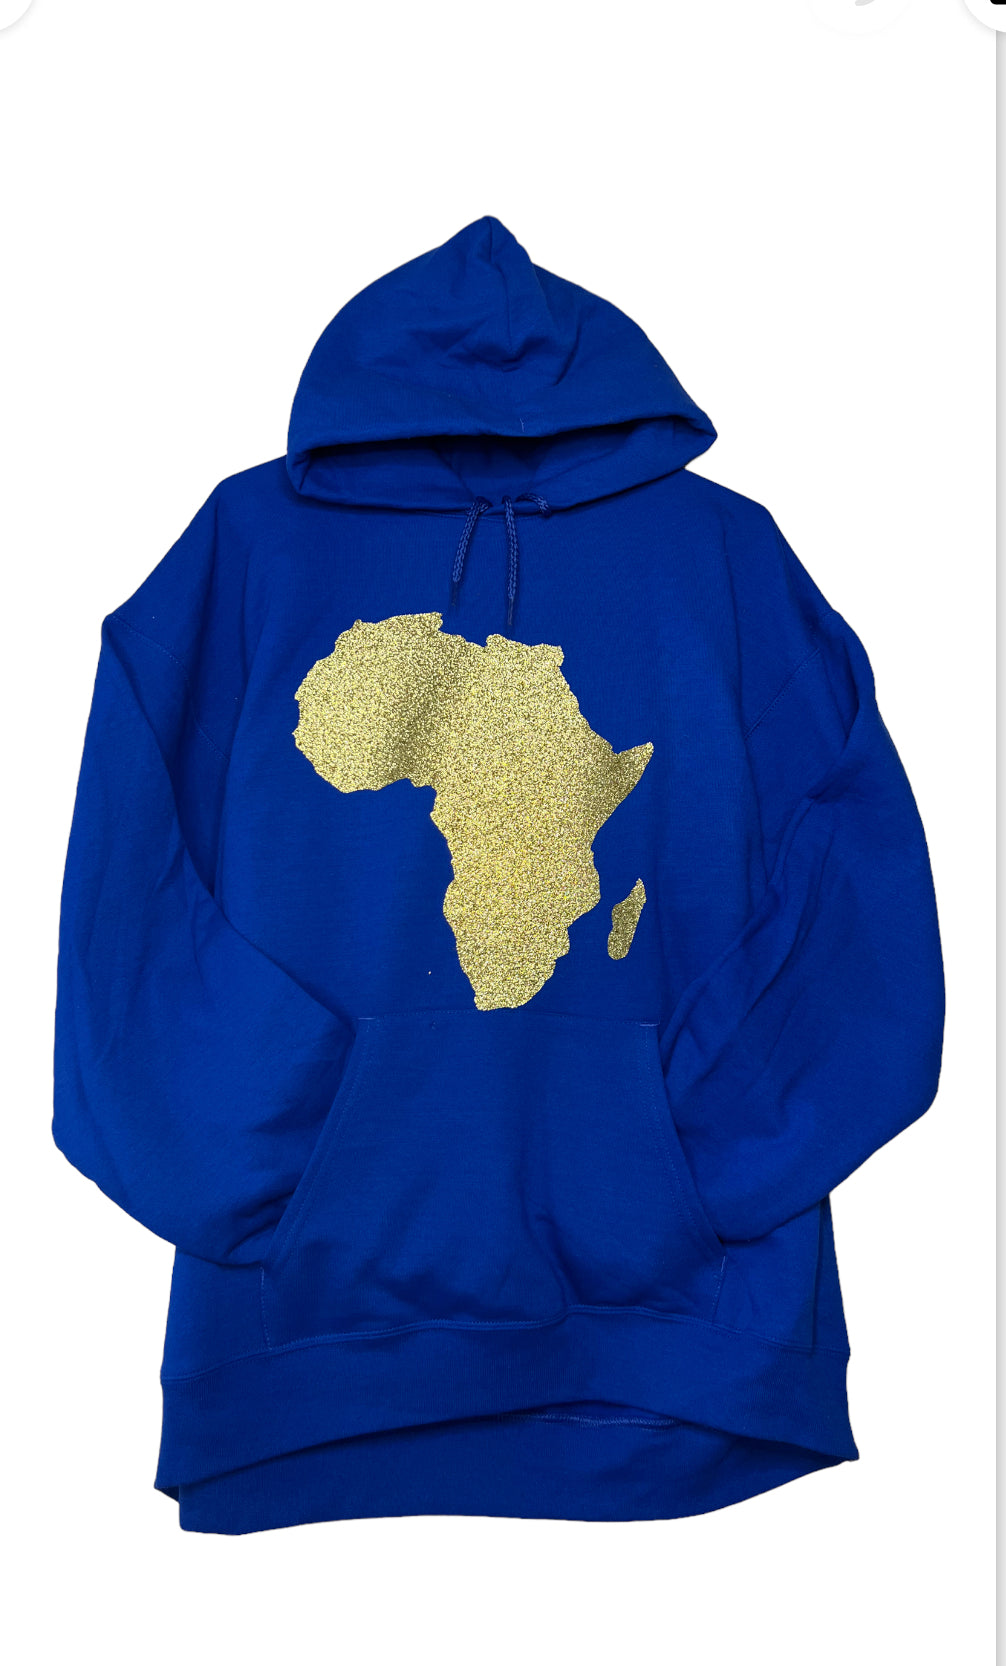 Royal Blue Navy Blue Black Men Women Unisex Hoodie with Gold Africa Map